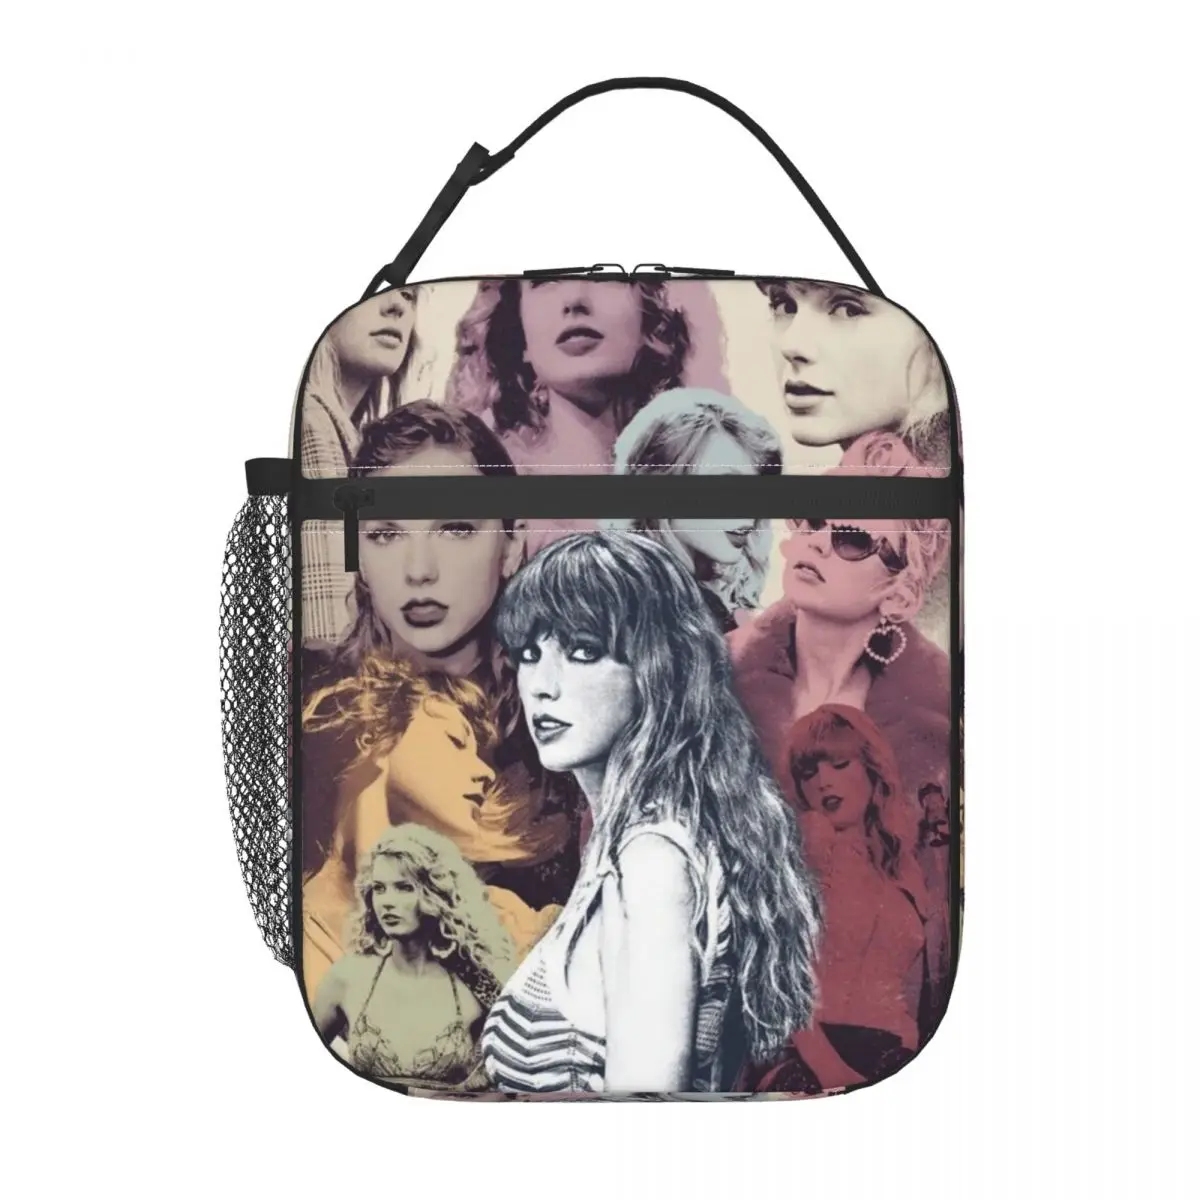 

Concert Movie Music Singer Taylor Eras Insulated Lunch Bag for Women Waterproof Thermal Cooler Lunch Box Beach Camping Travel